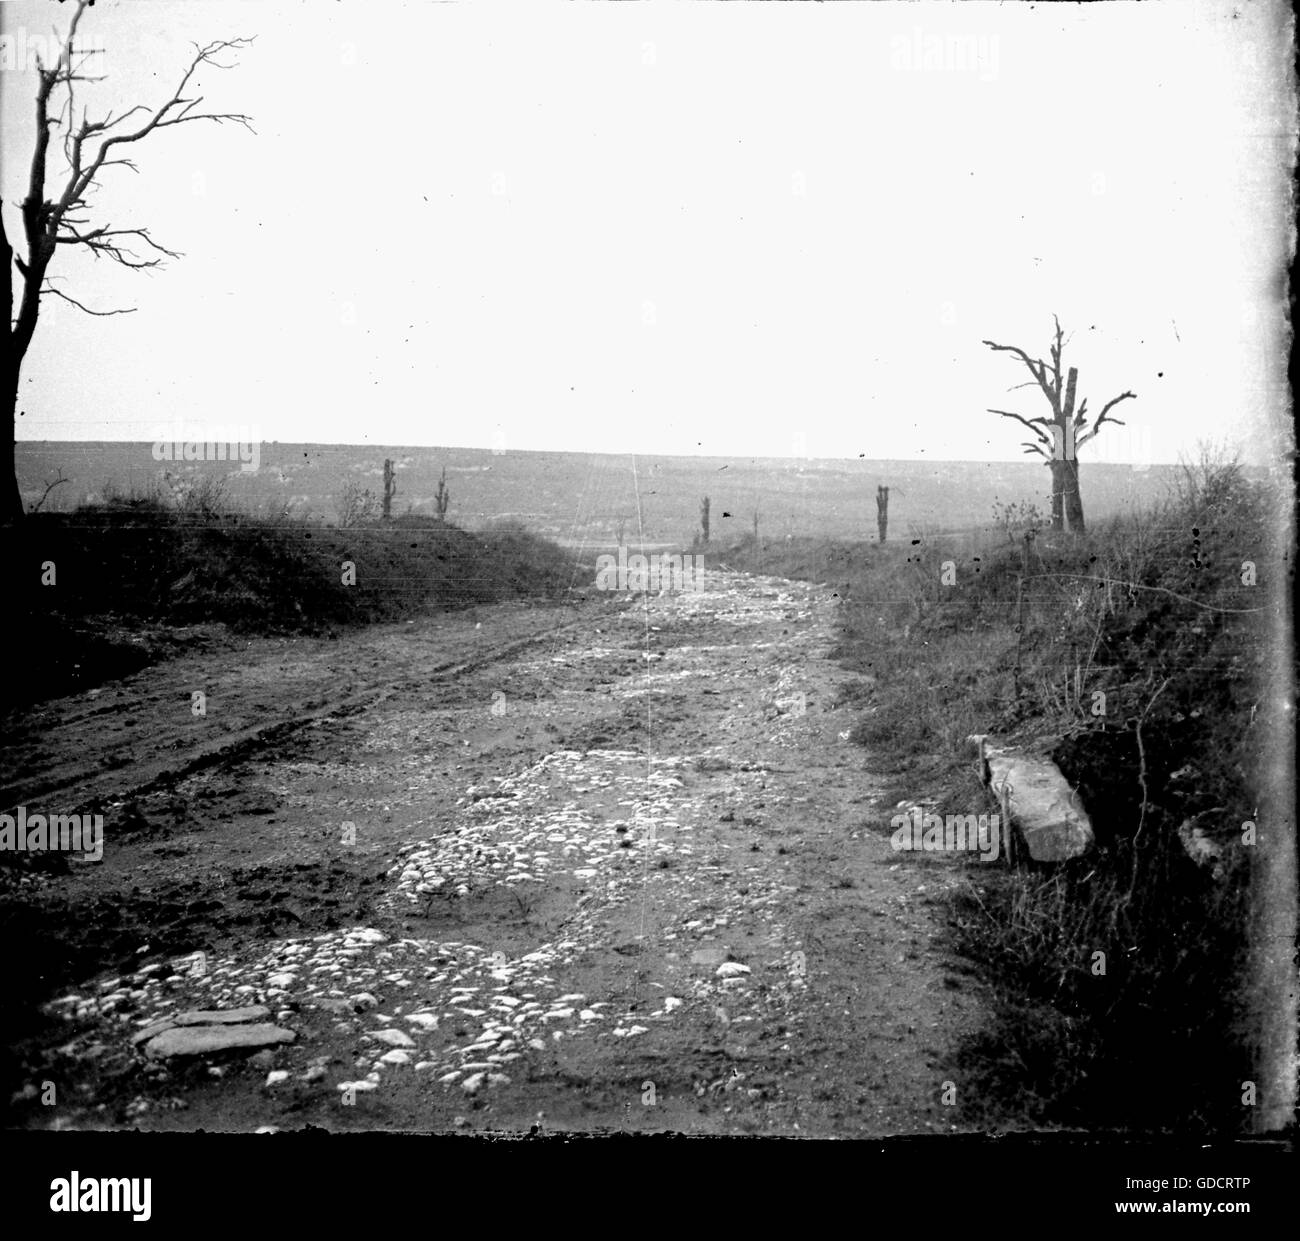 Scenes at the end of the 1st World War c1918/1919  Devastation at Bazentin Le Petit nearby where there is now a military cemetary  Photo by Tony Henshaw       Scanned direct from a stereo original negative from a rare archive record of original photography from a British Doctor photographing at the end of World War 1    © World copyright. Stock Photo